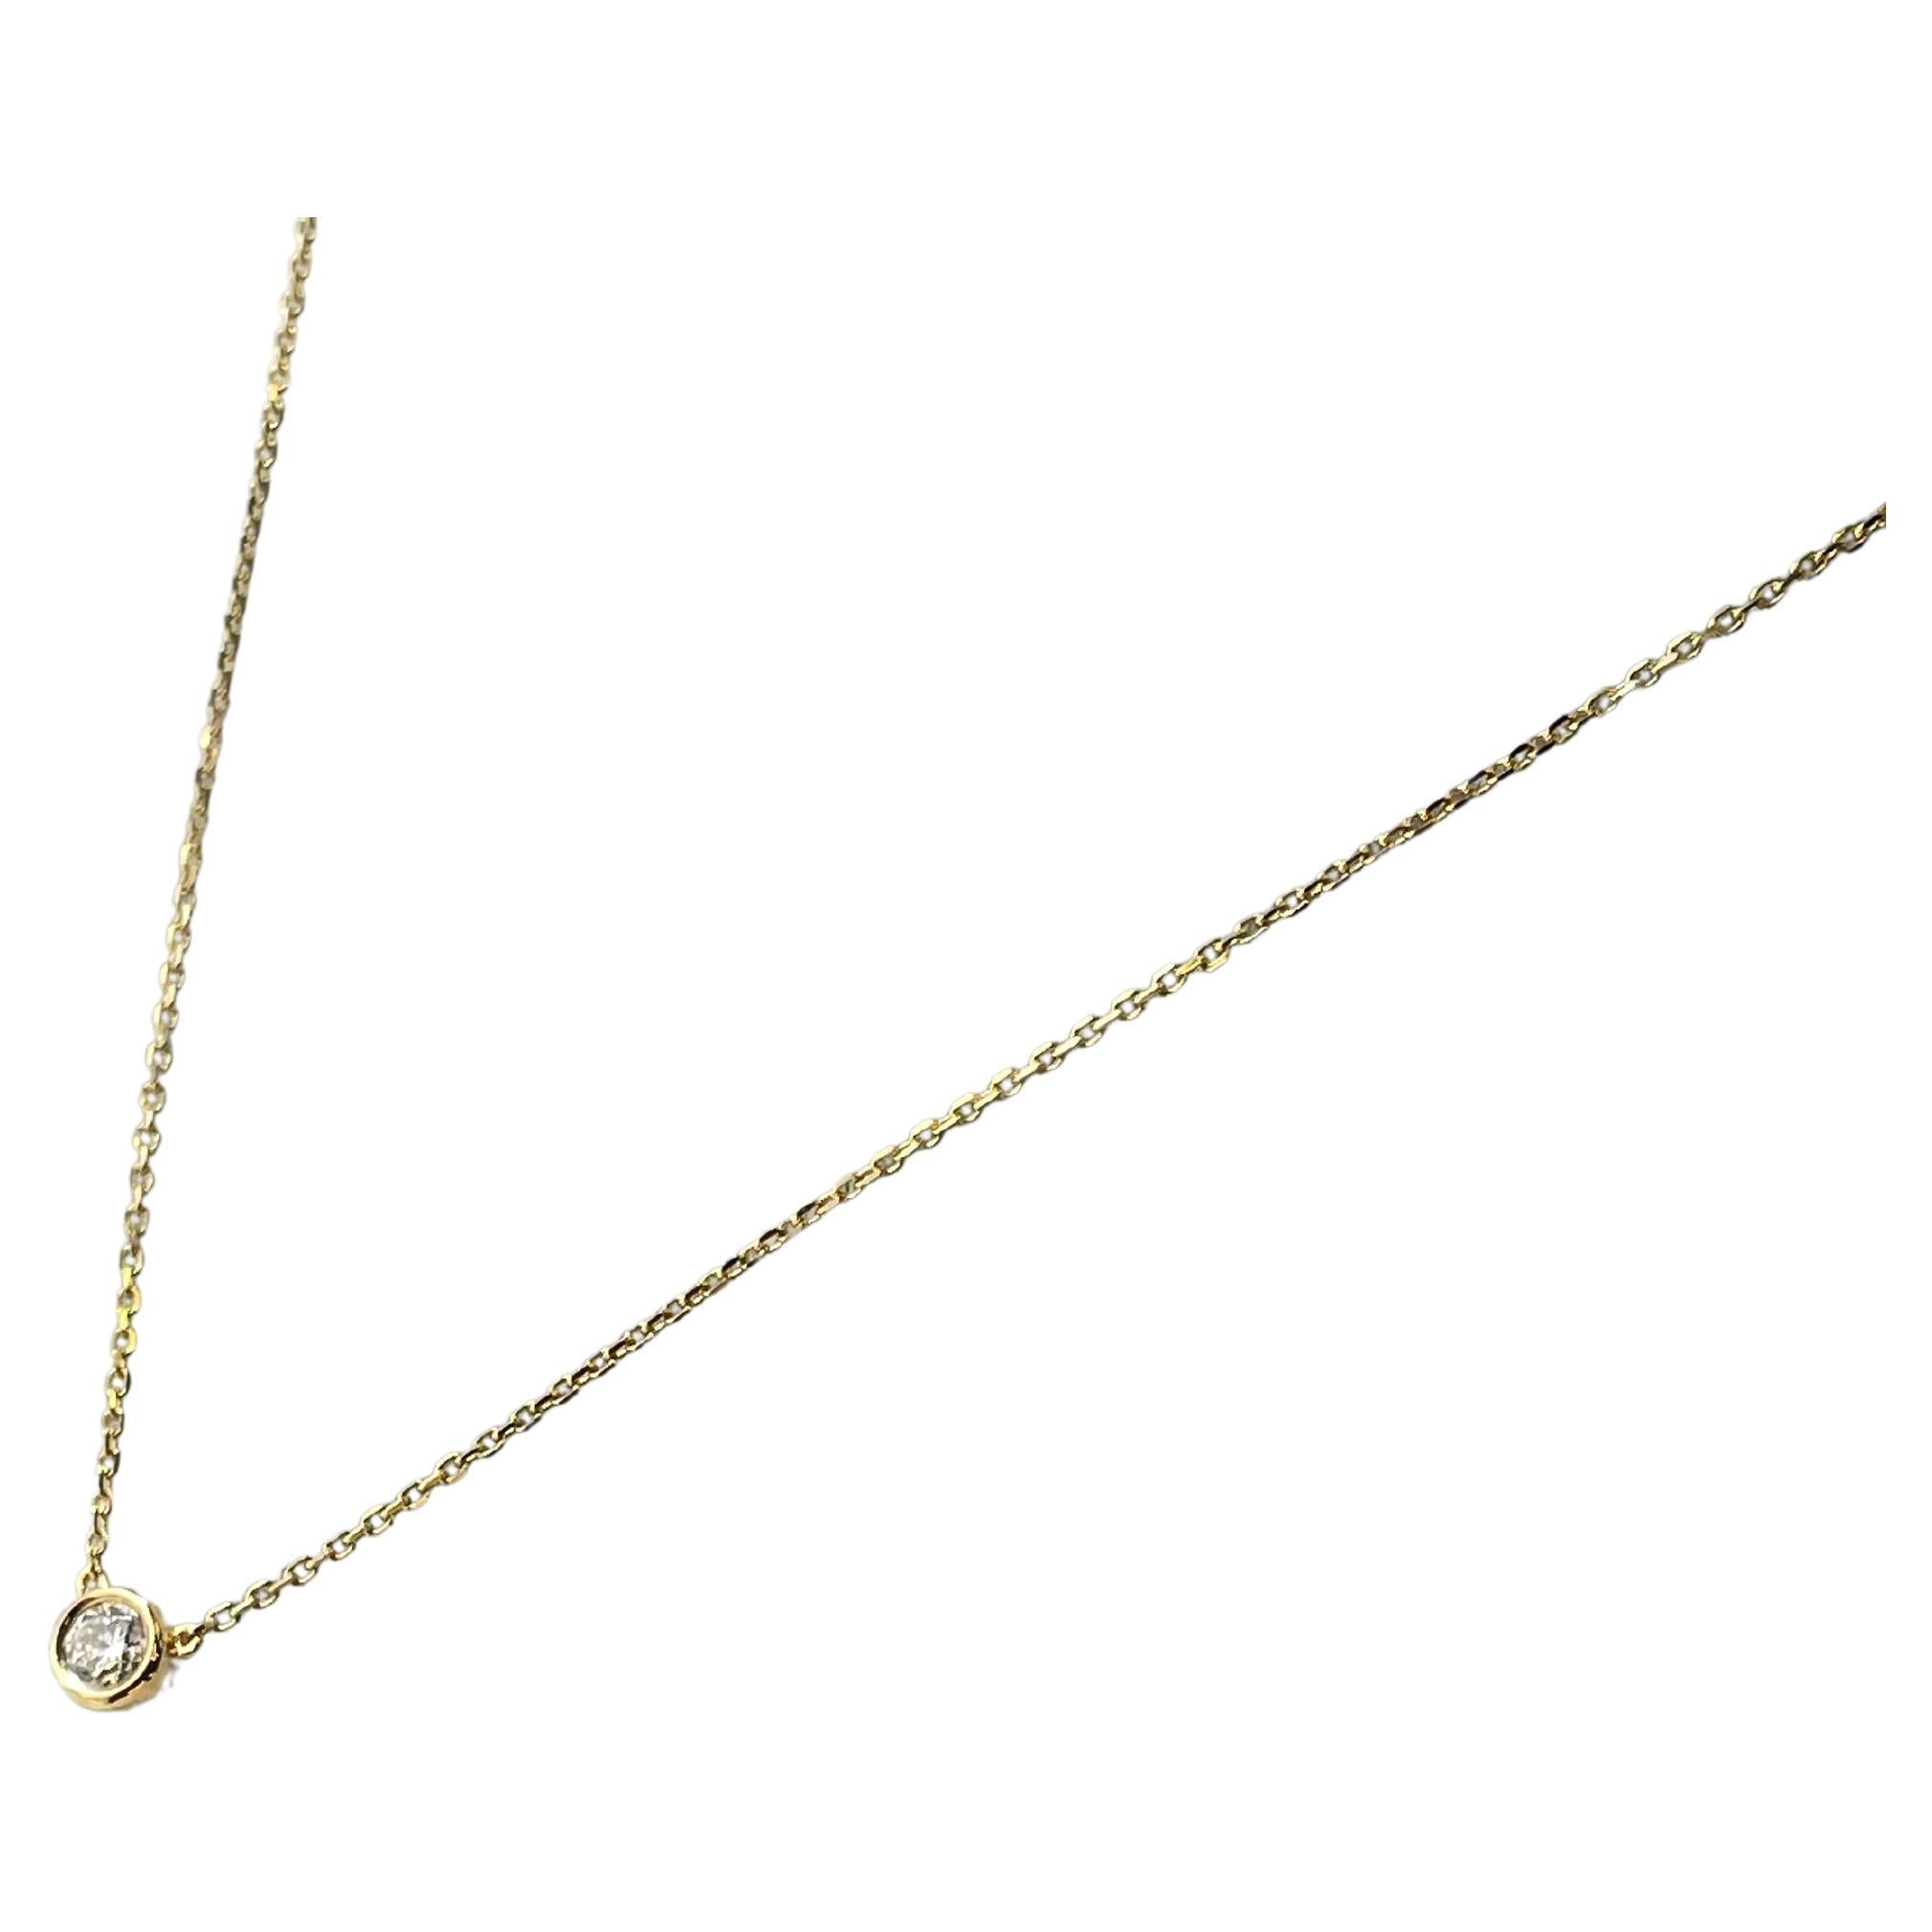 0.25ct Bezel Set Solitaire Diamond Necklace in 18k Yellow Gold